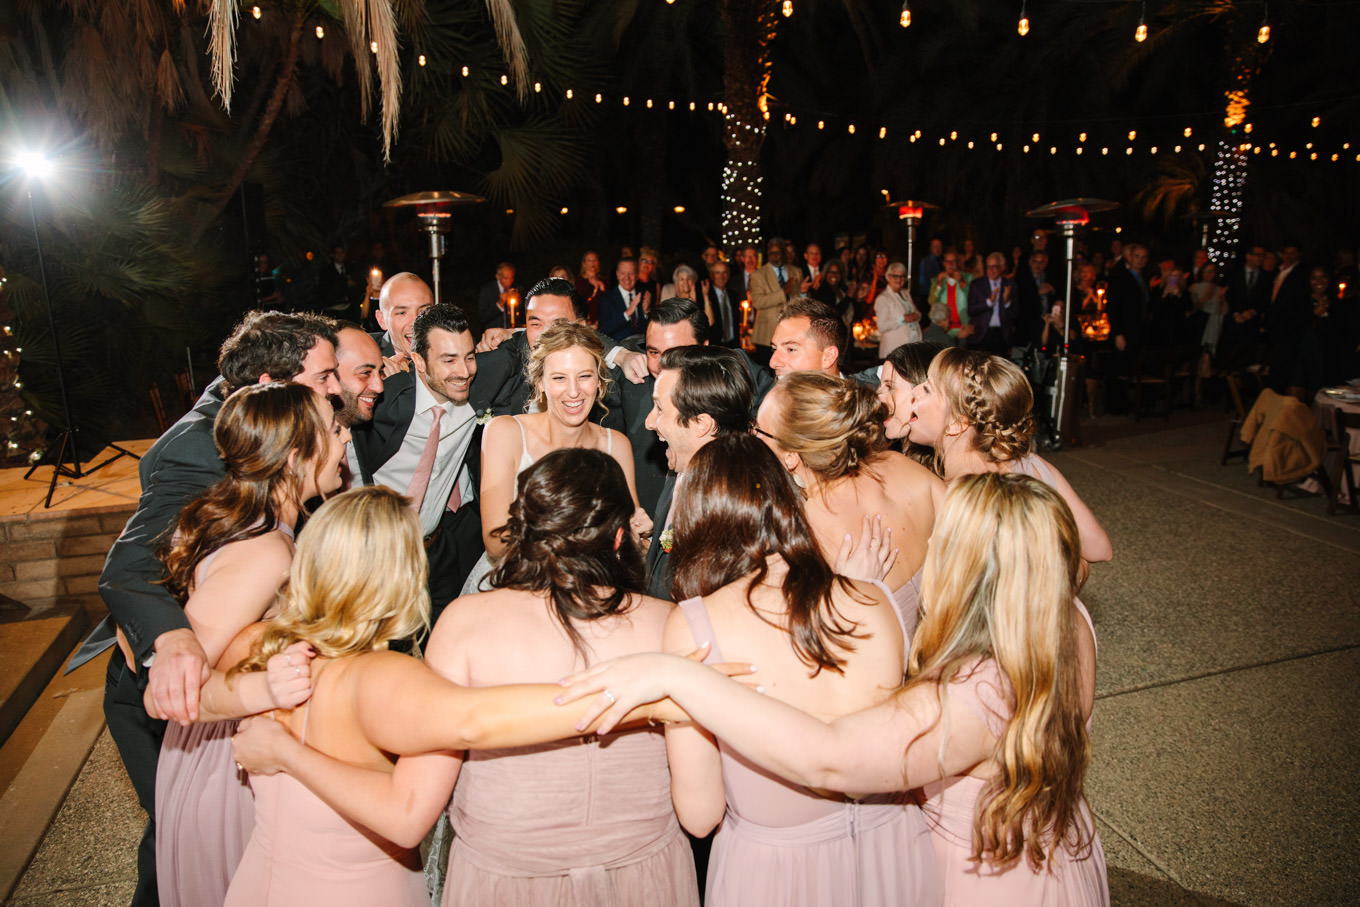 Wedding party group hug | Living Desert Zoo & Gardens wedding with unique details | Elevated and colorful wedding photography for fun-loving couples in Southern California |  #PalmSprings #palmspringsphotographer #gardenwedding #palmspringswedding  Source: Mary Costa Photography | Los Angeles wedding photographer 